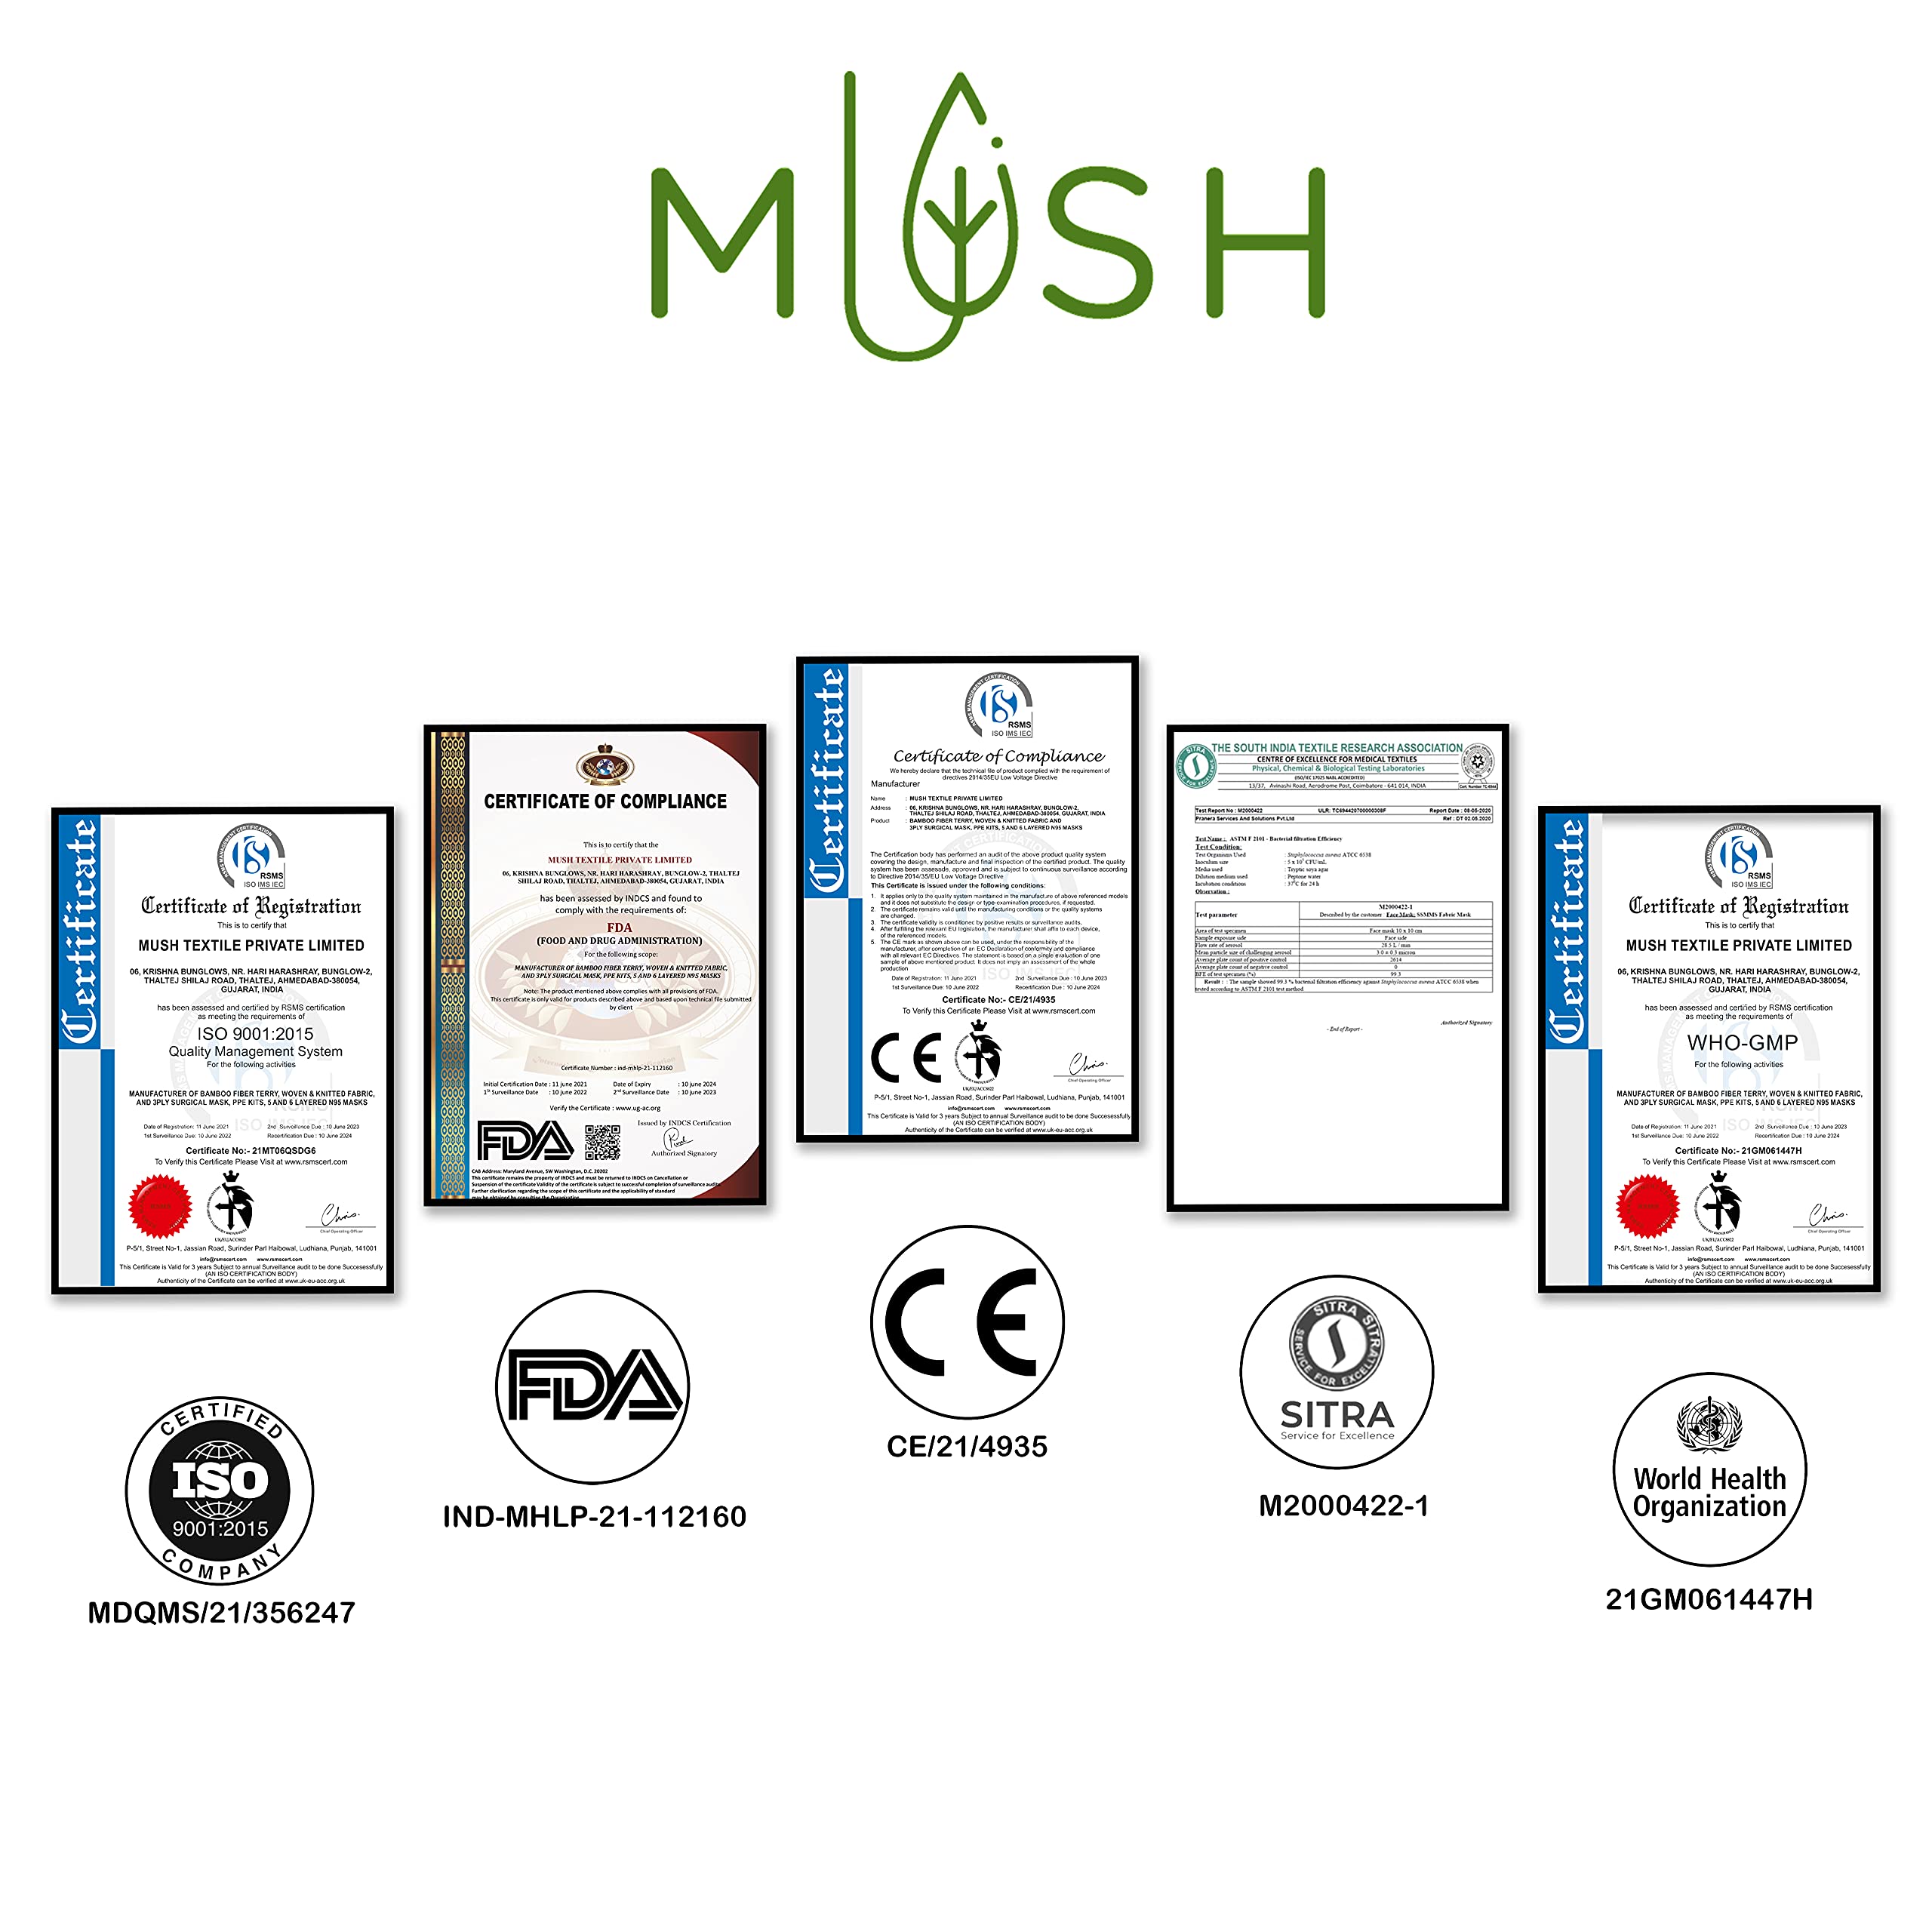 Mush N95 Face Mask : Soft, Reusable 6 layered face mask (Pack of 10). CE, ISO, FDA Certified and NABL, SITRA lab tested